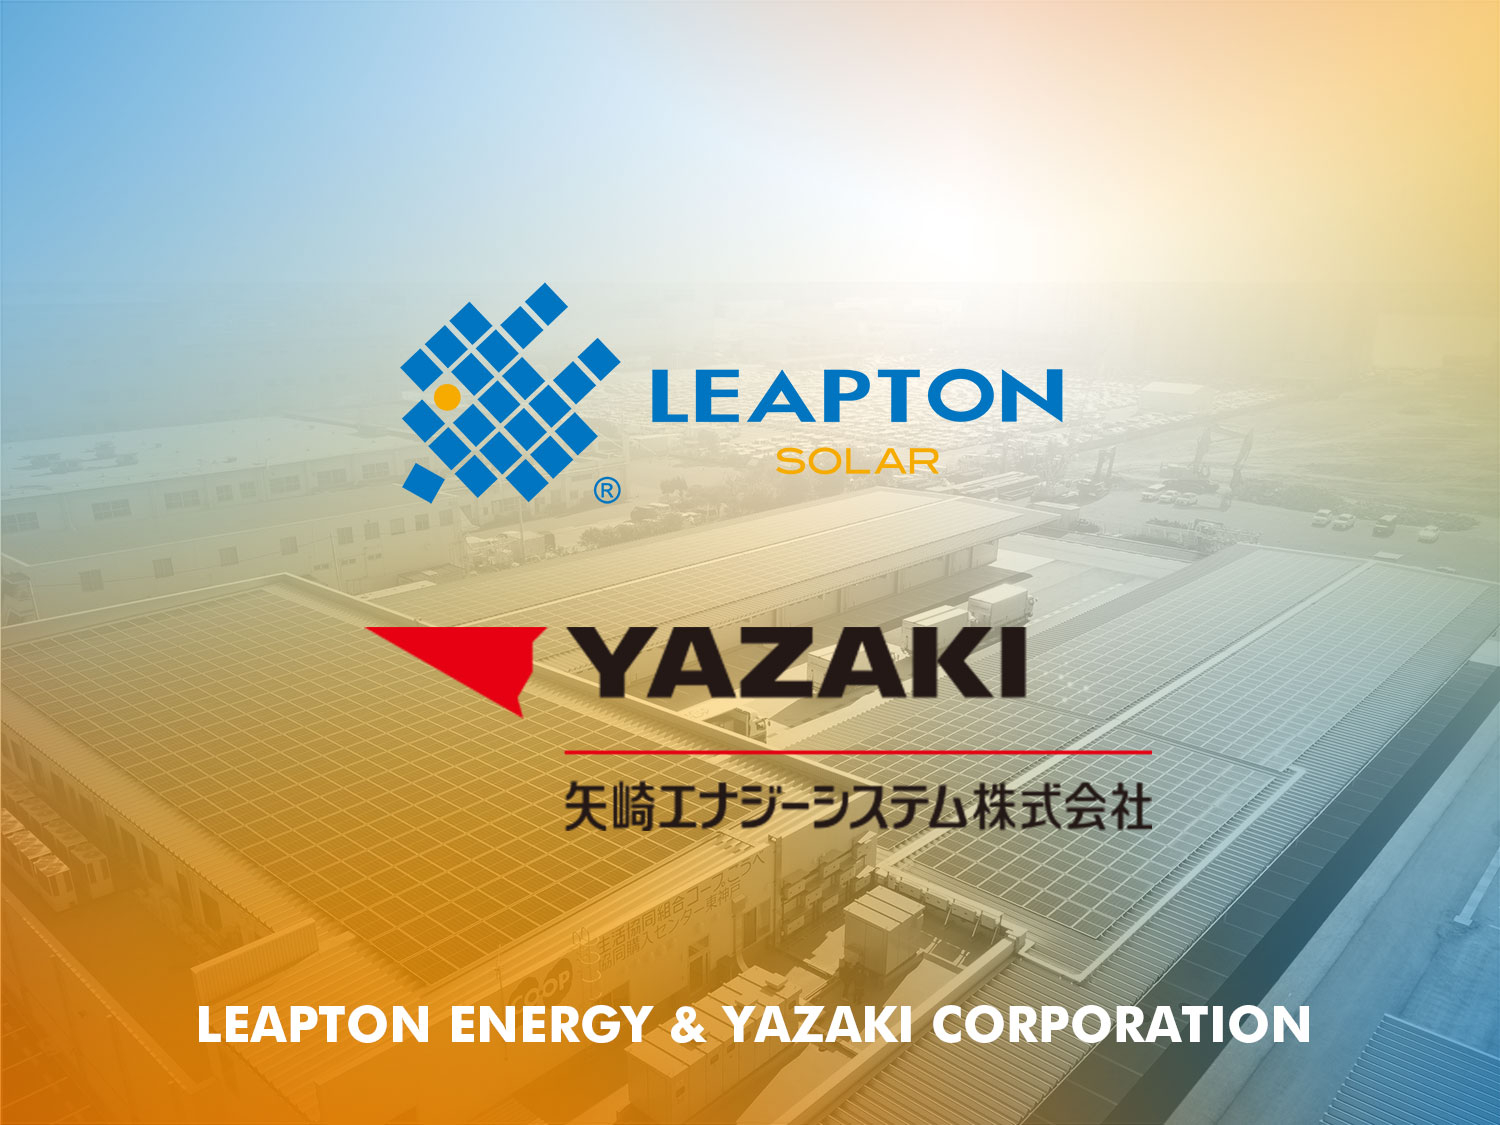 Leapton Energy is excited to announce its recent partnership with Yazaki Corporation (矢崎総業株式会社)